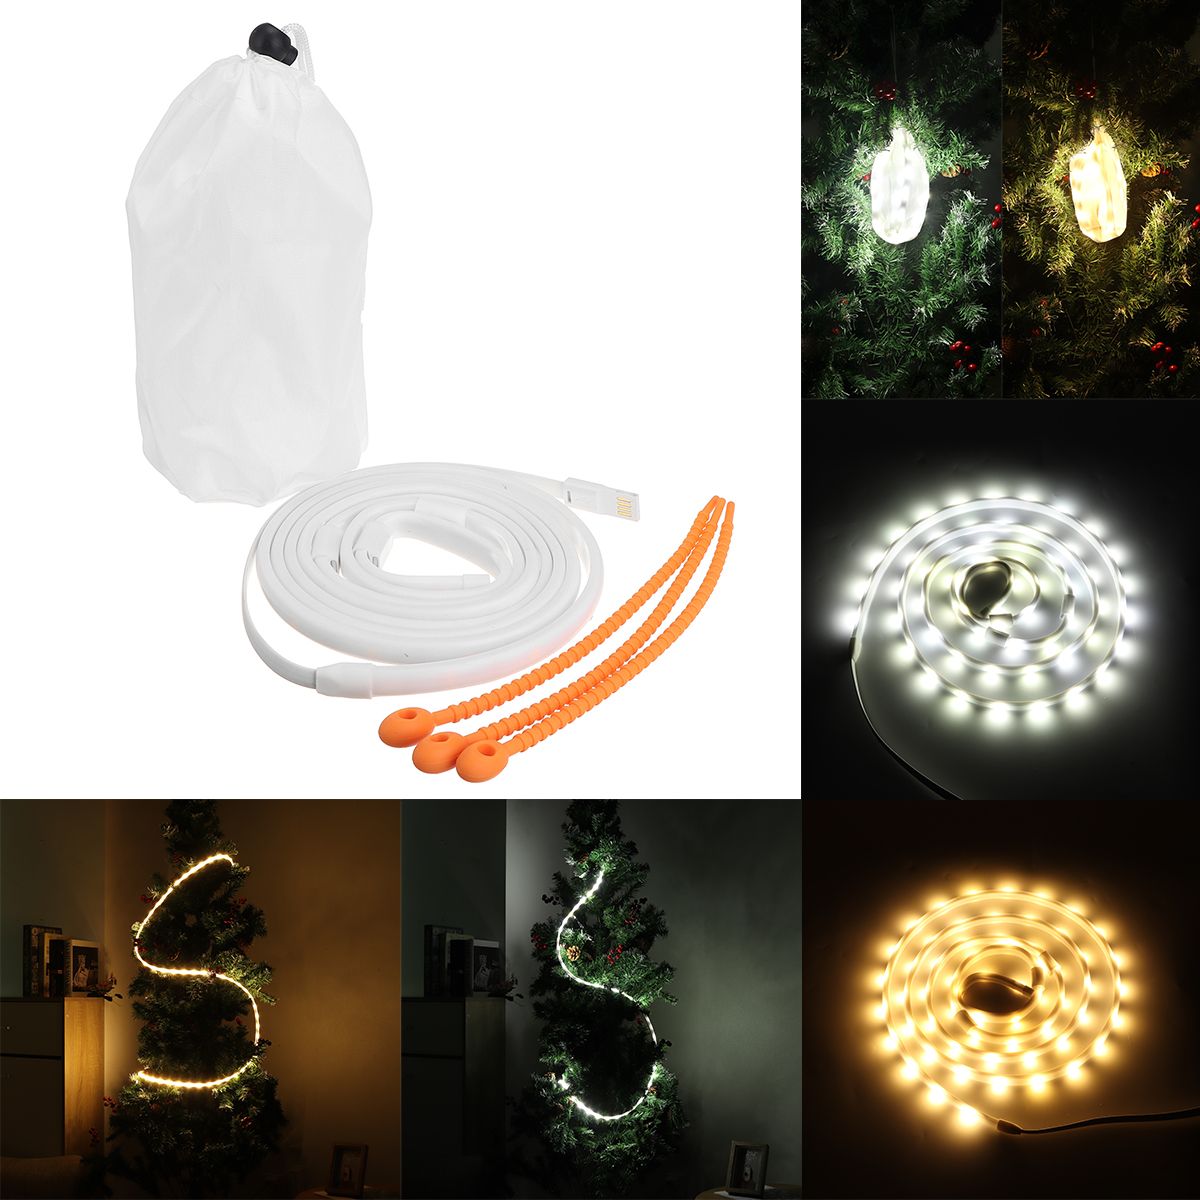 12M-5050-LED-Light-Strip-Under-Cabinet-Deck-Camping-Hiking-USB-Waterproof-Tent-Lamp-1738058